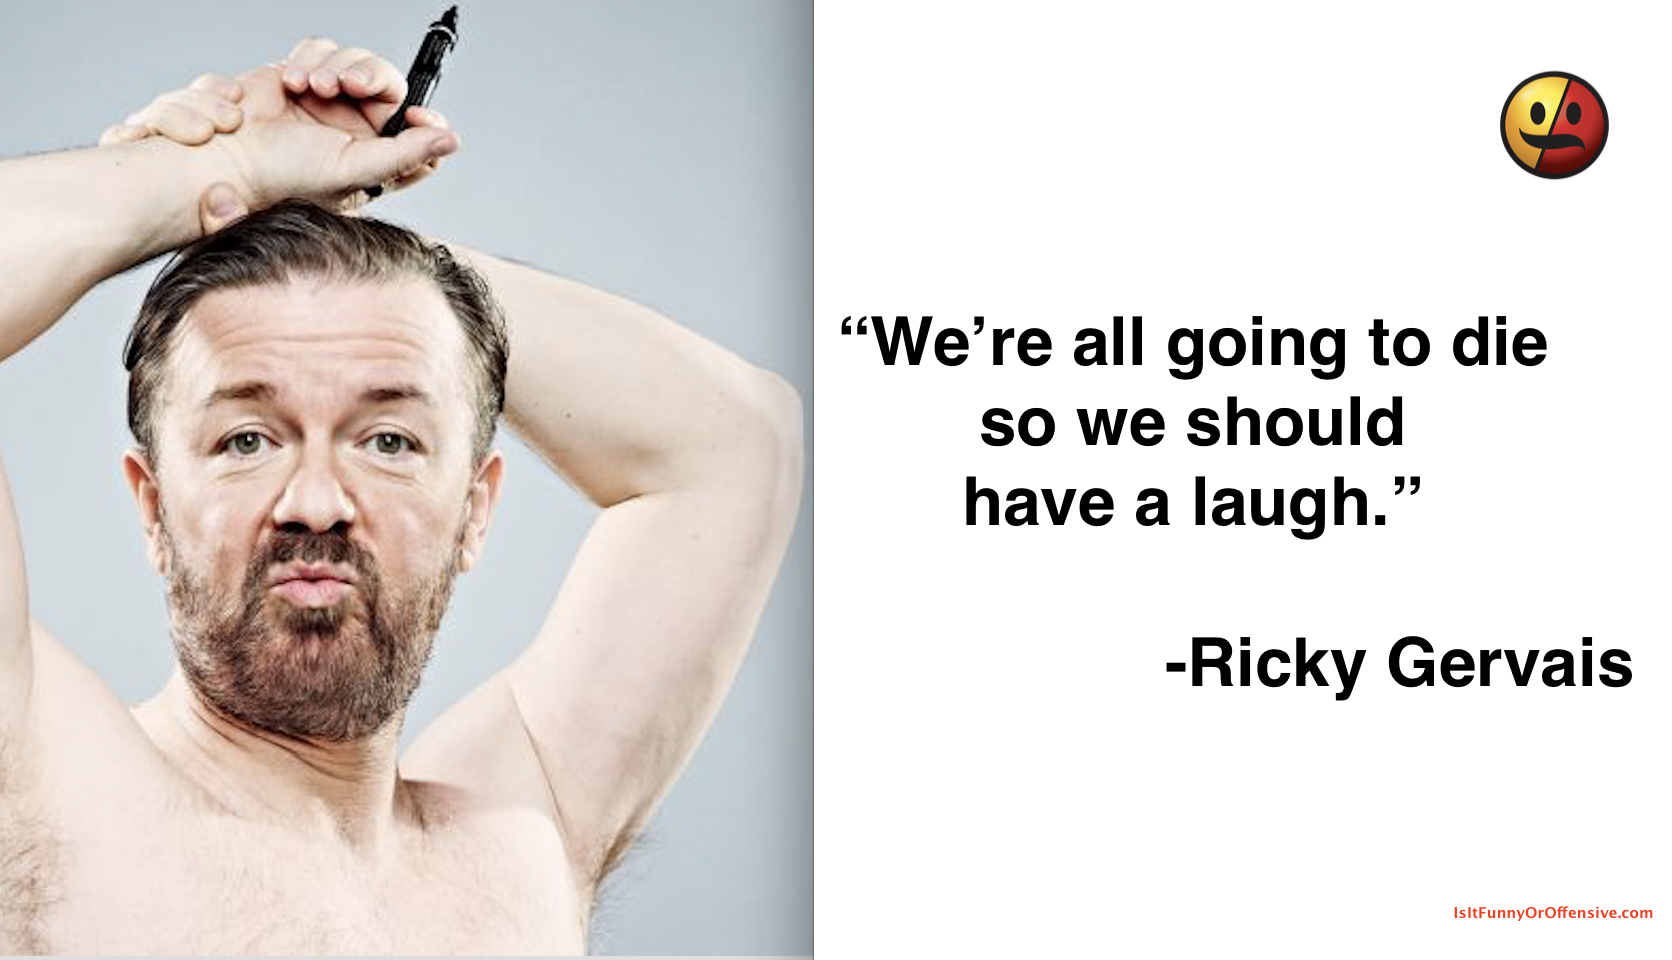 Ricky Gervais: "We're all going to die so we should have a laugh"